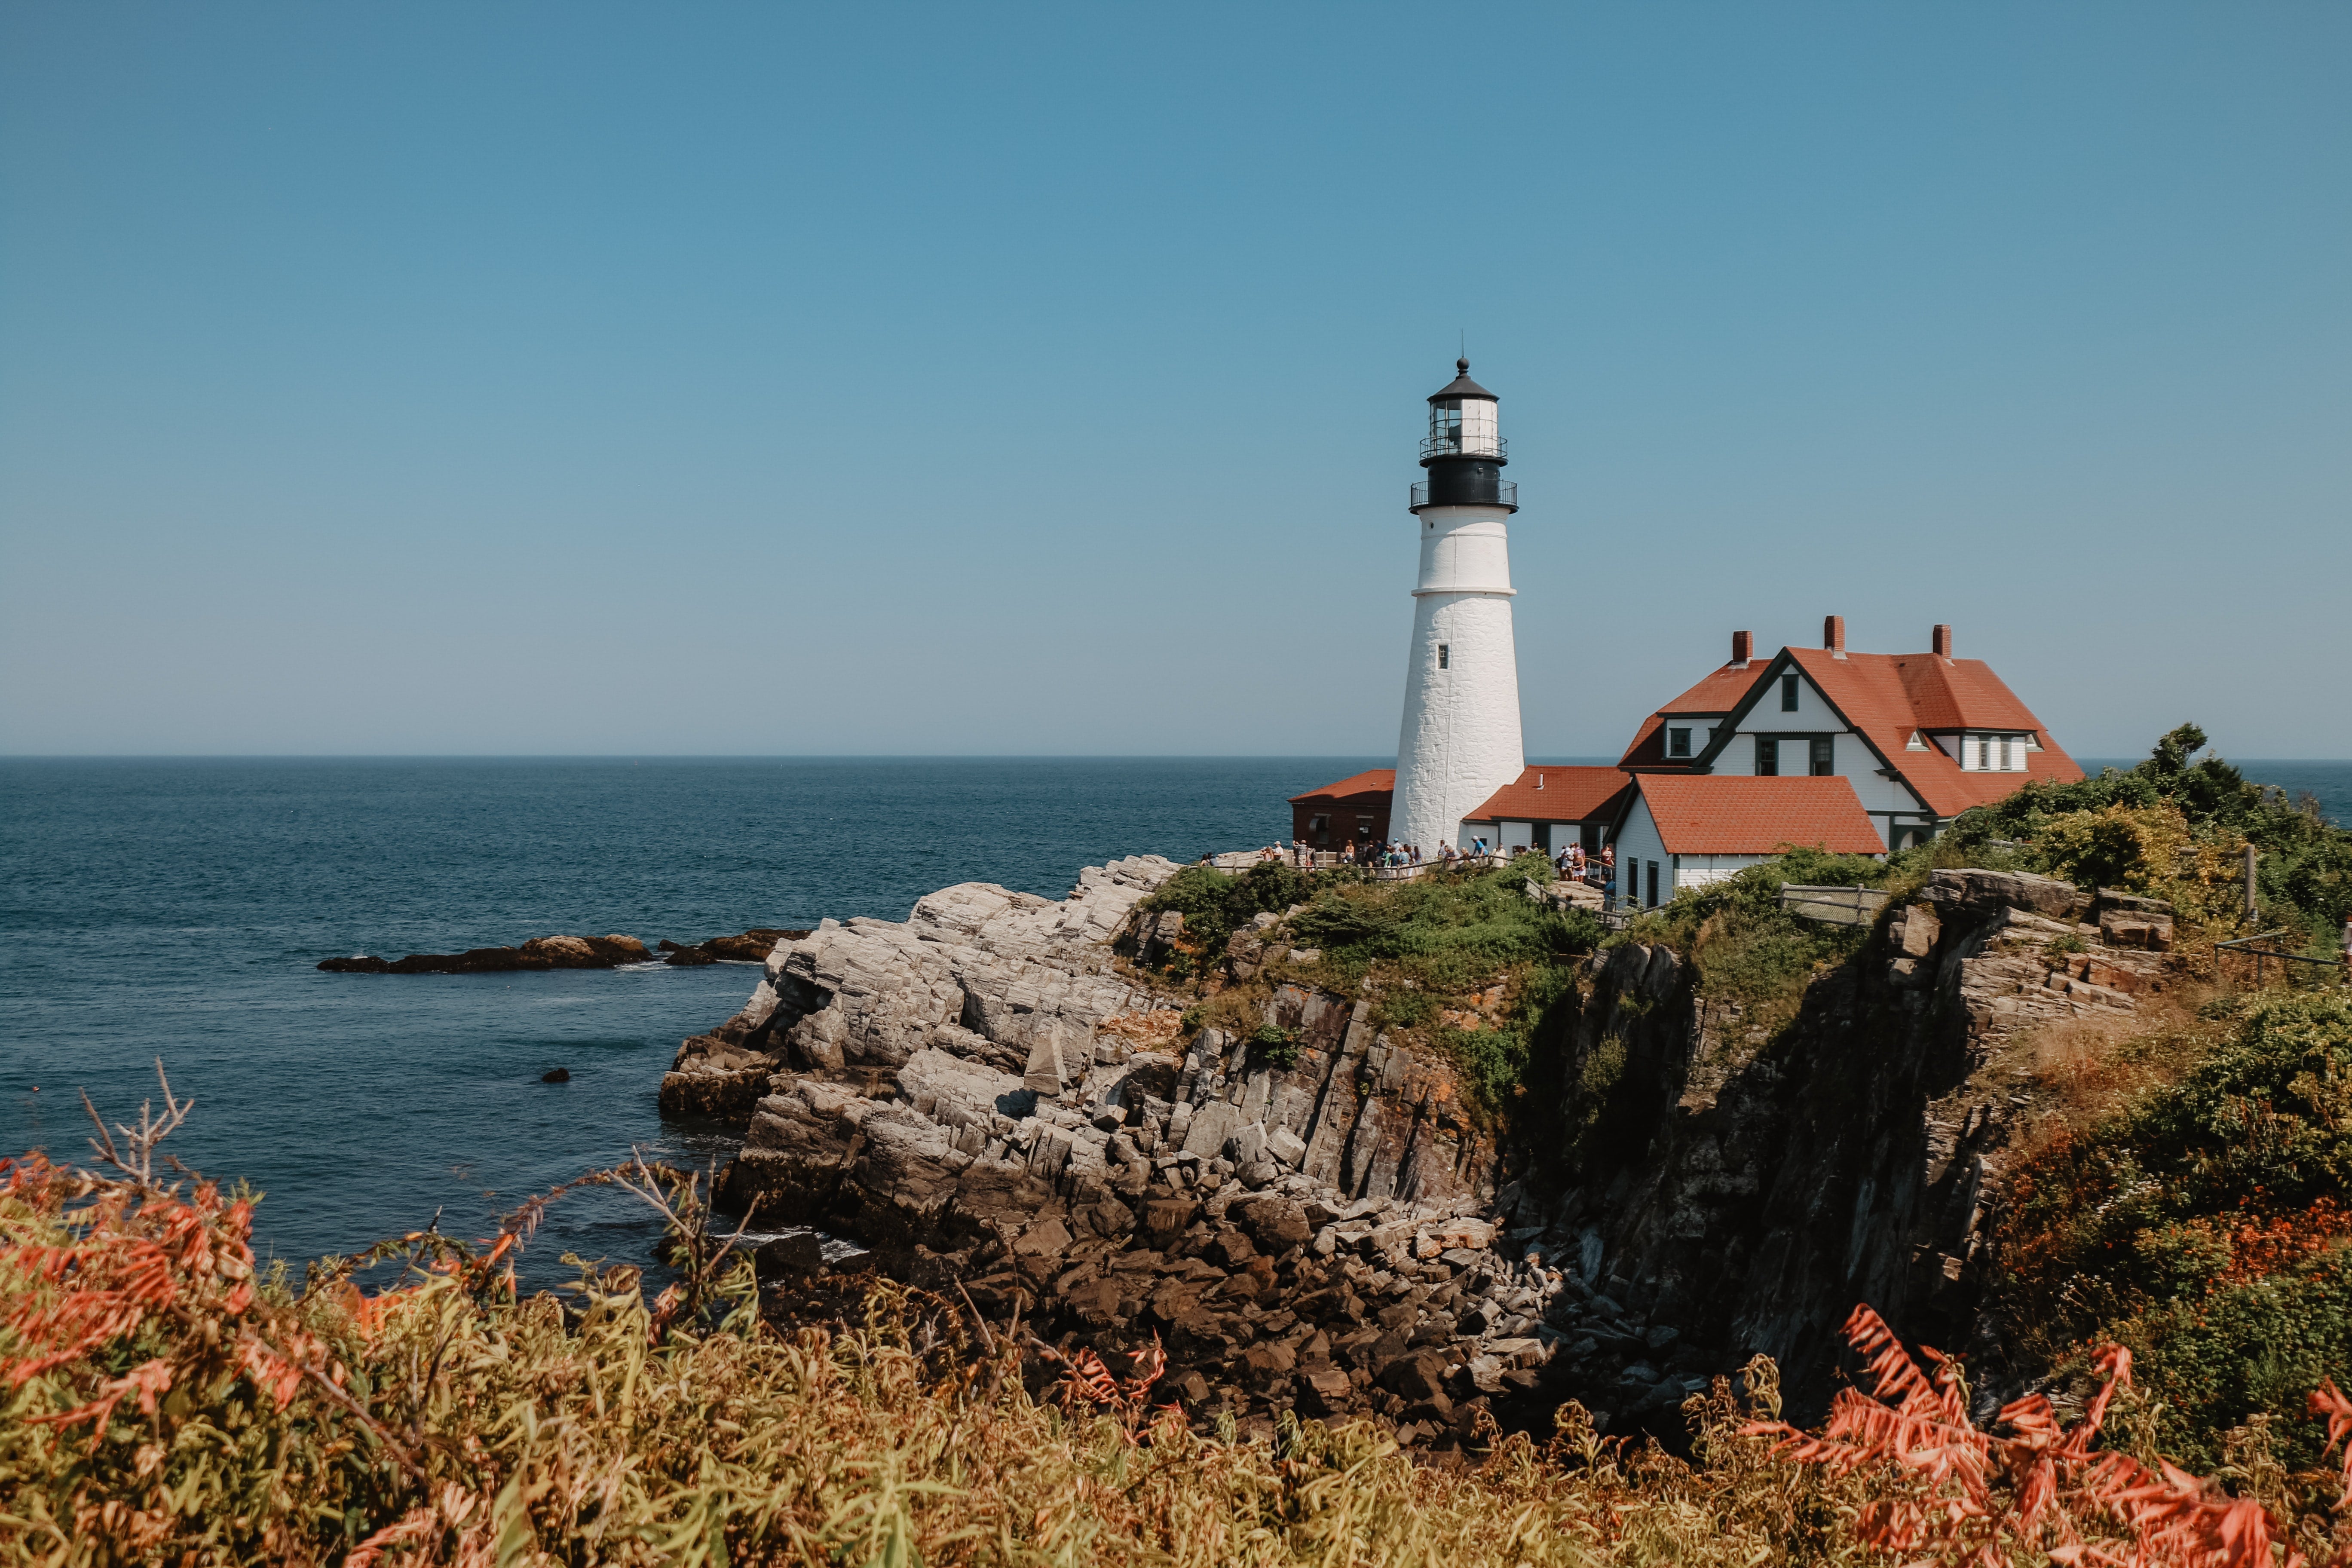 A lighthouse and small house on the edge of a cliff on the ocean in Portland, Maine.